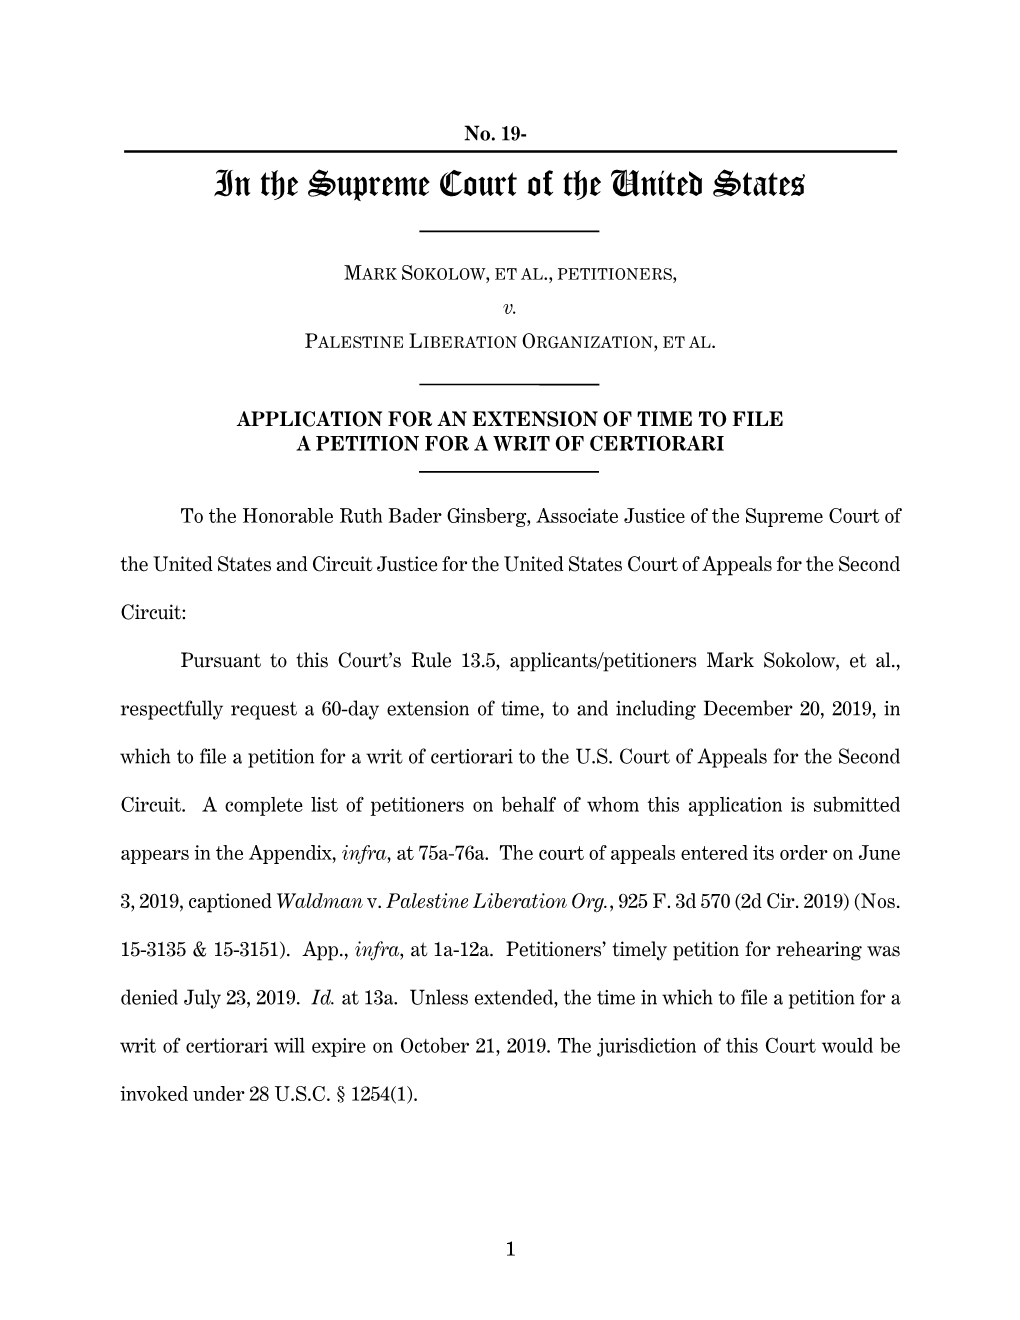 Application for an Extension of Time to File a Petition for a Writ of Certiorari